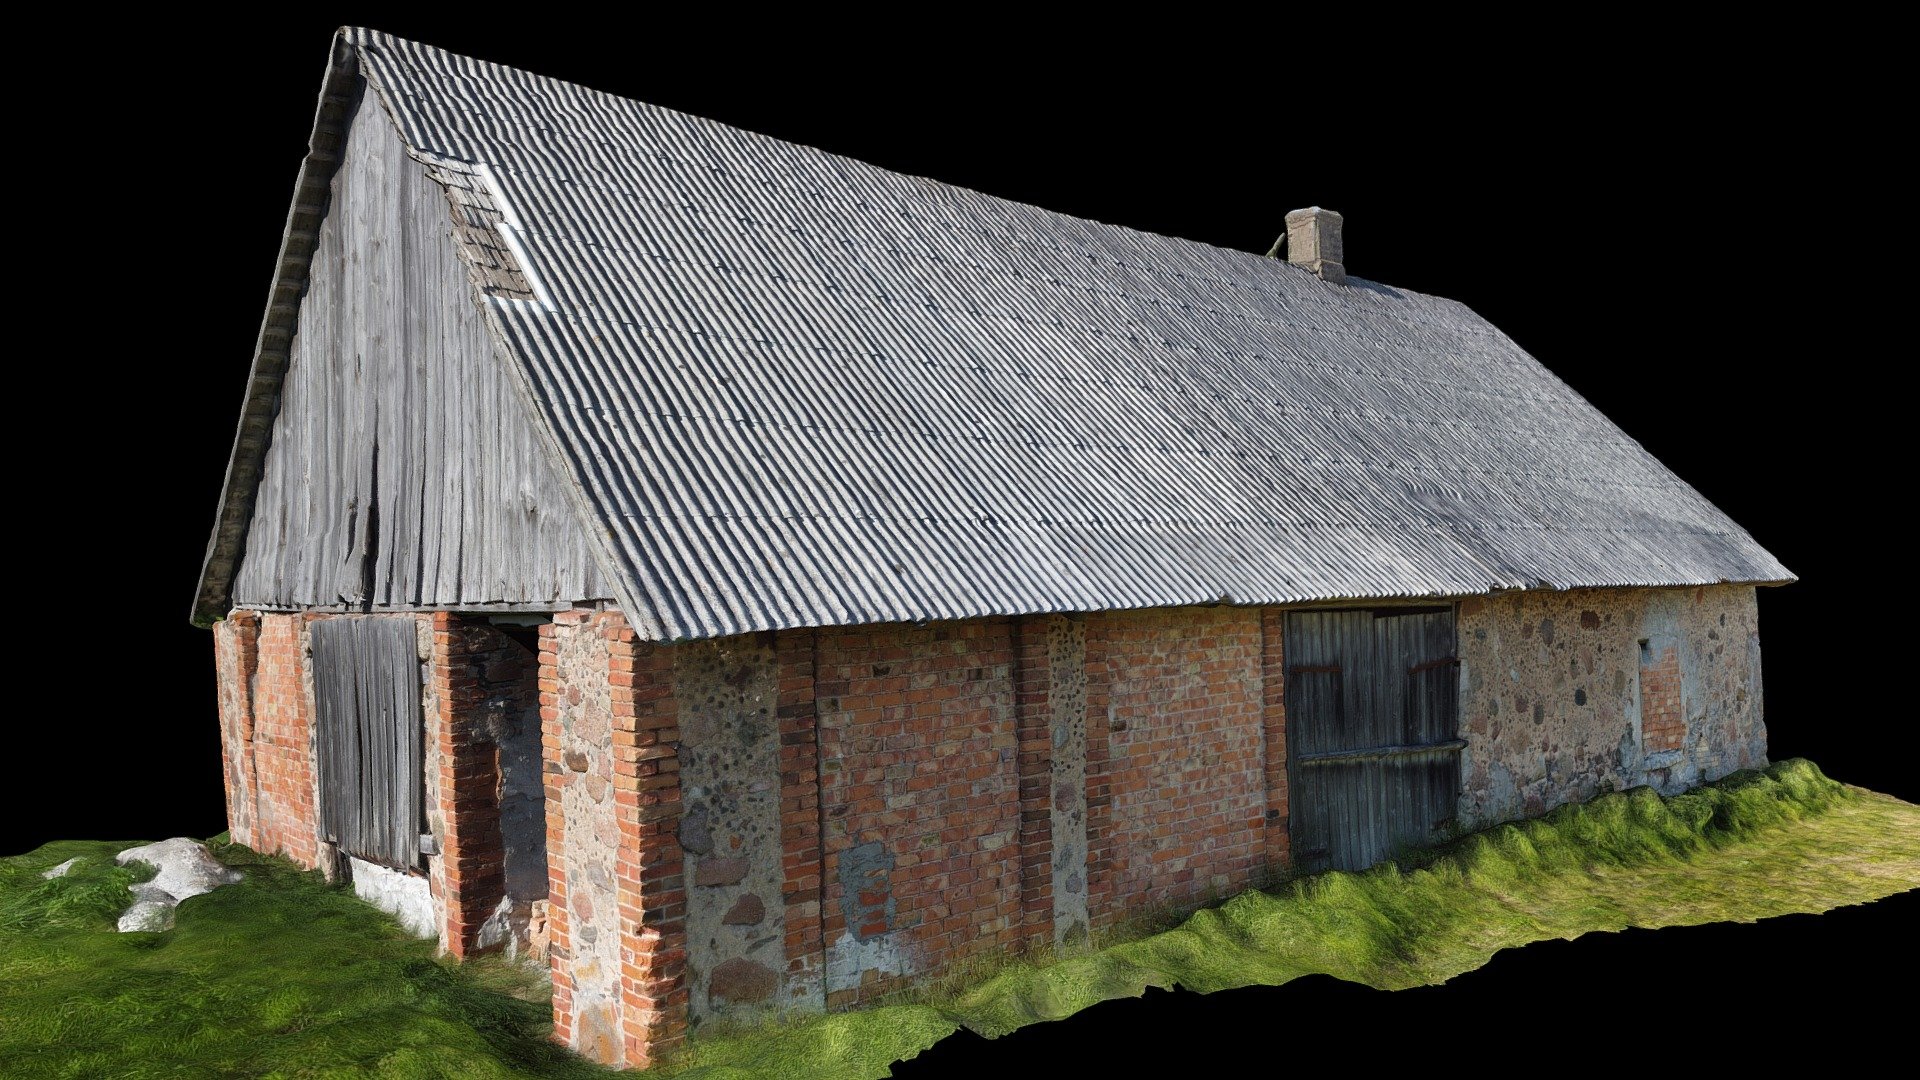 Abandoned, old, derelict stone barn with &lsquo;A' shaped roof.
Stone walls, tiled roof, chimney, old wooden doors 3d model